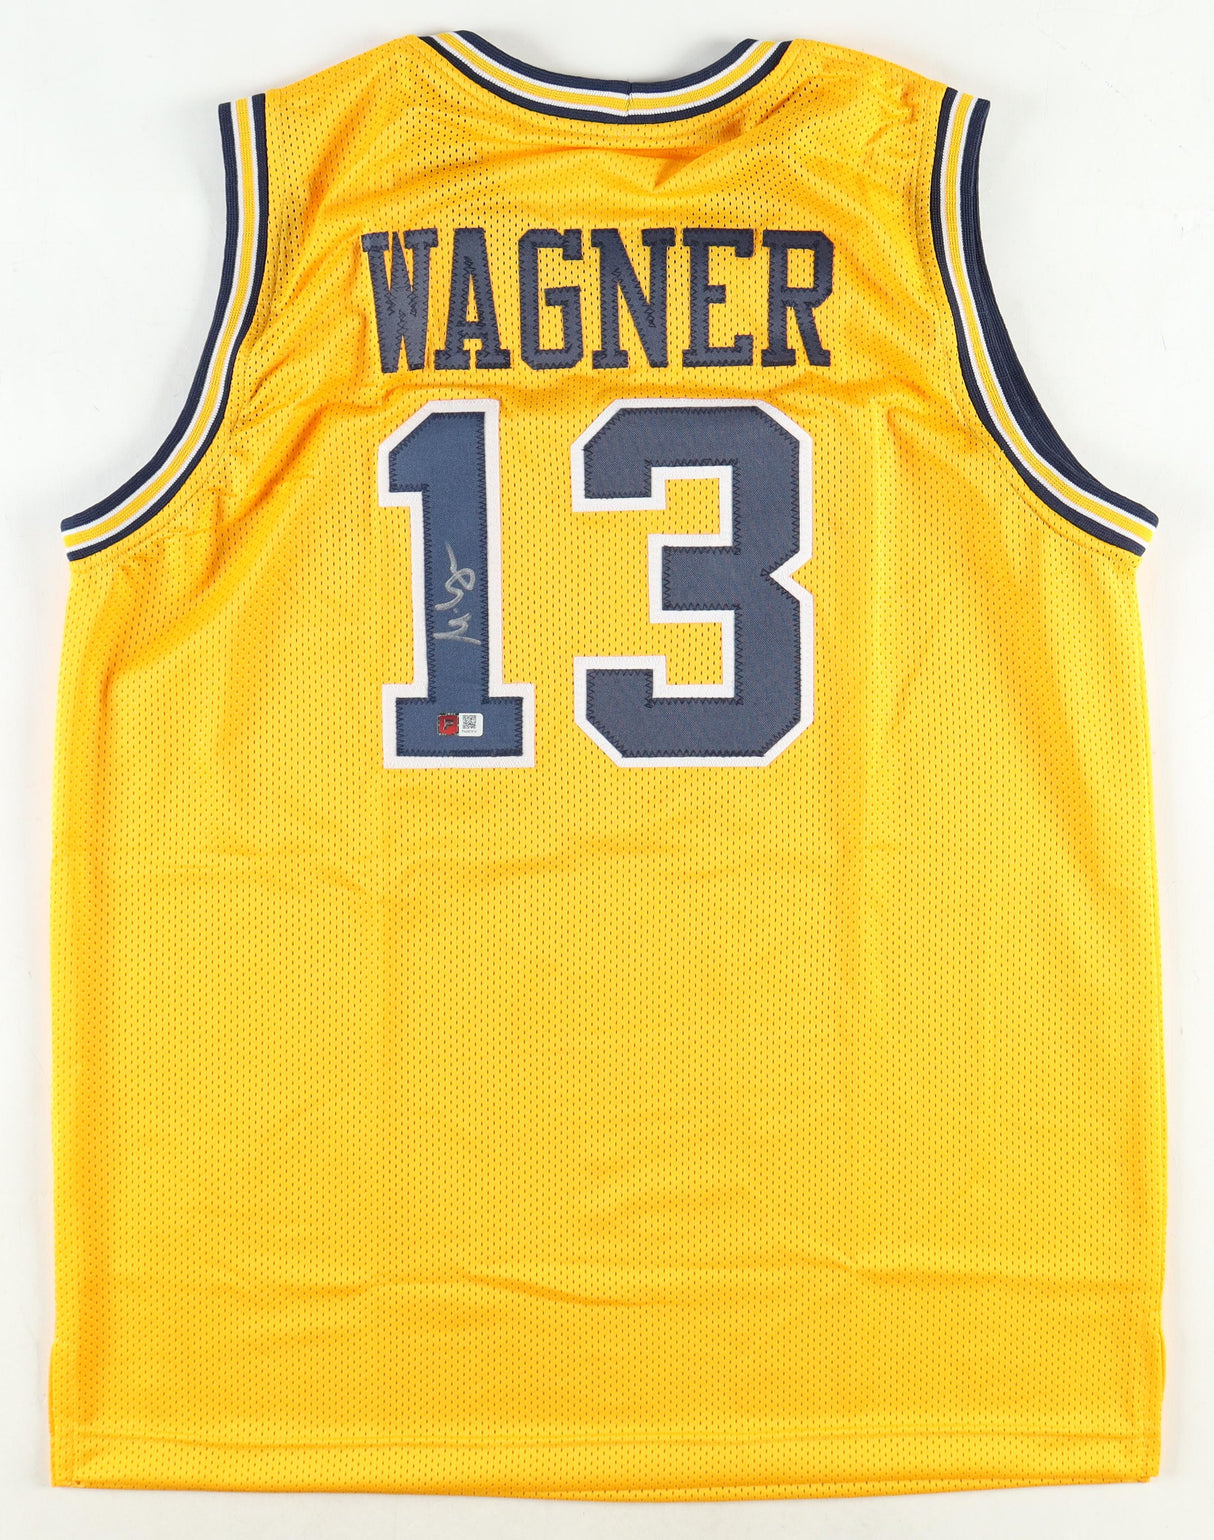 Moe Wagner Signed Jersey (PA)